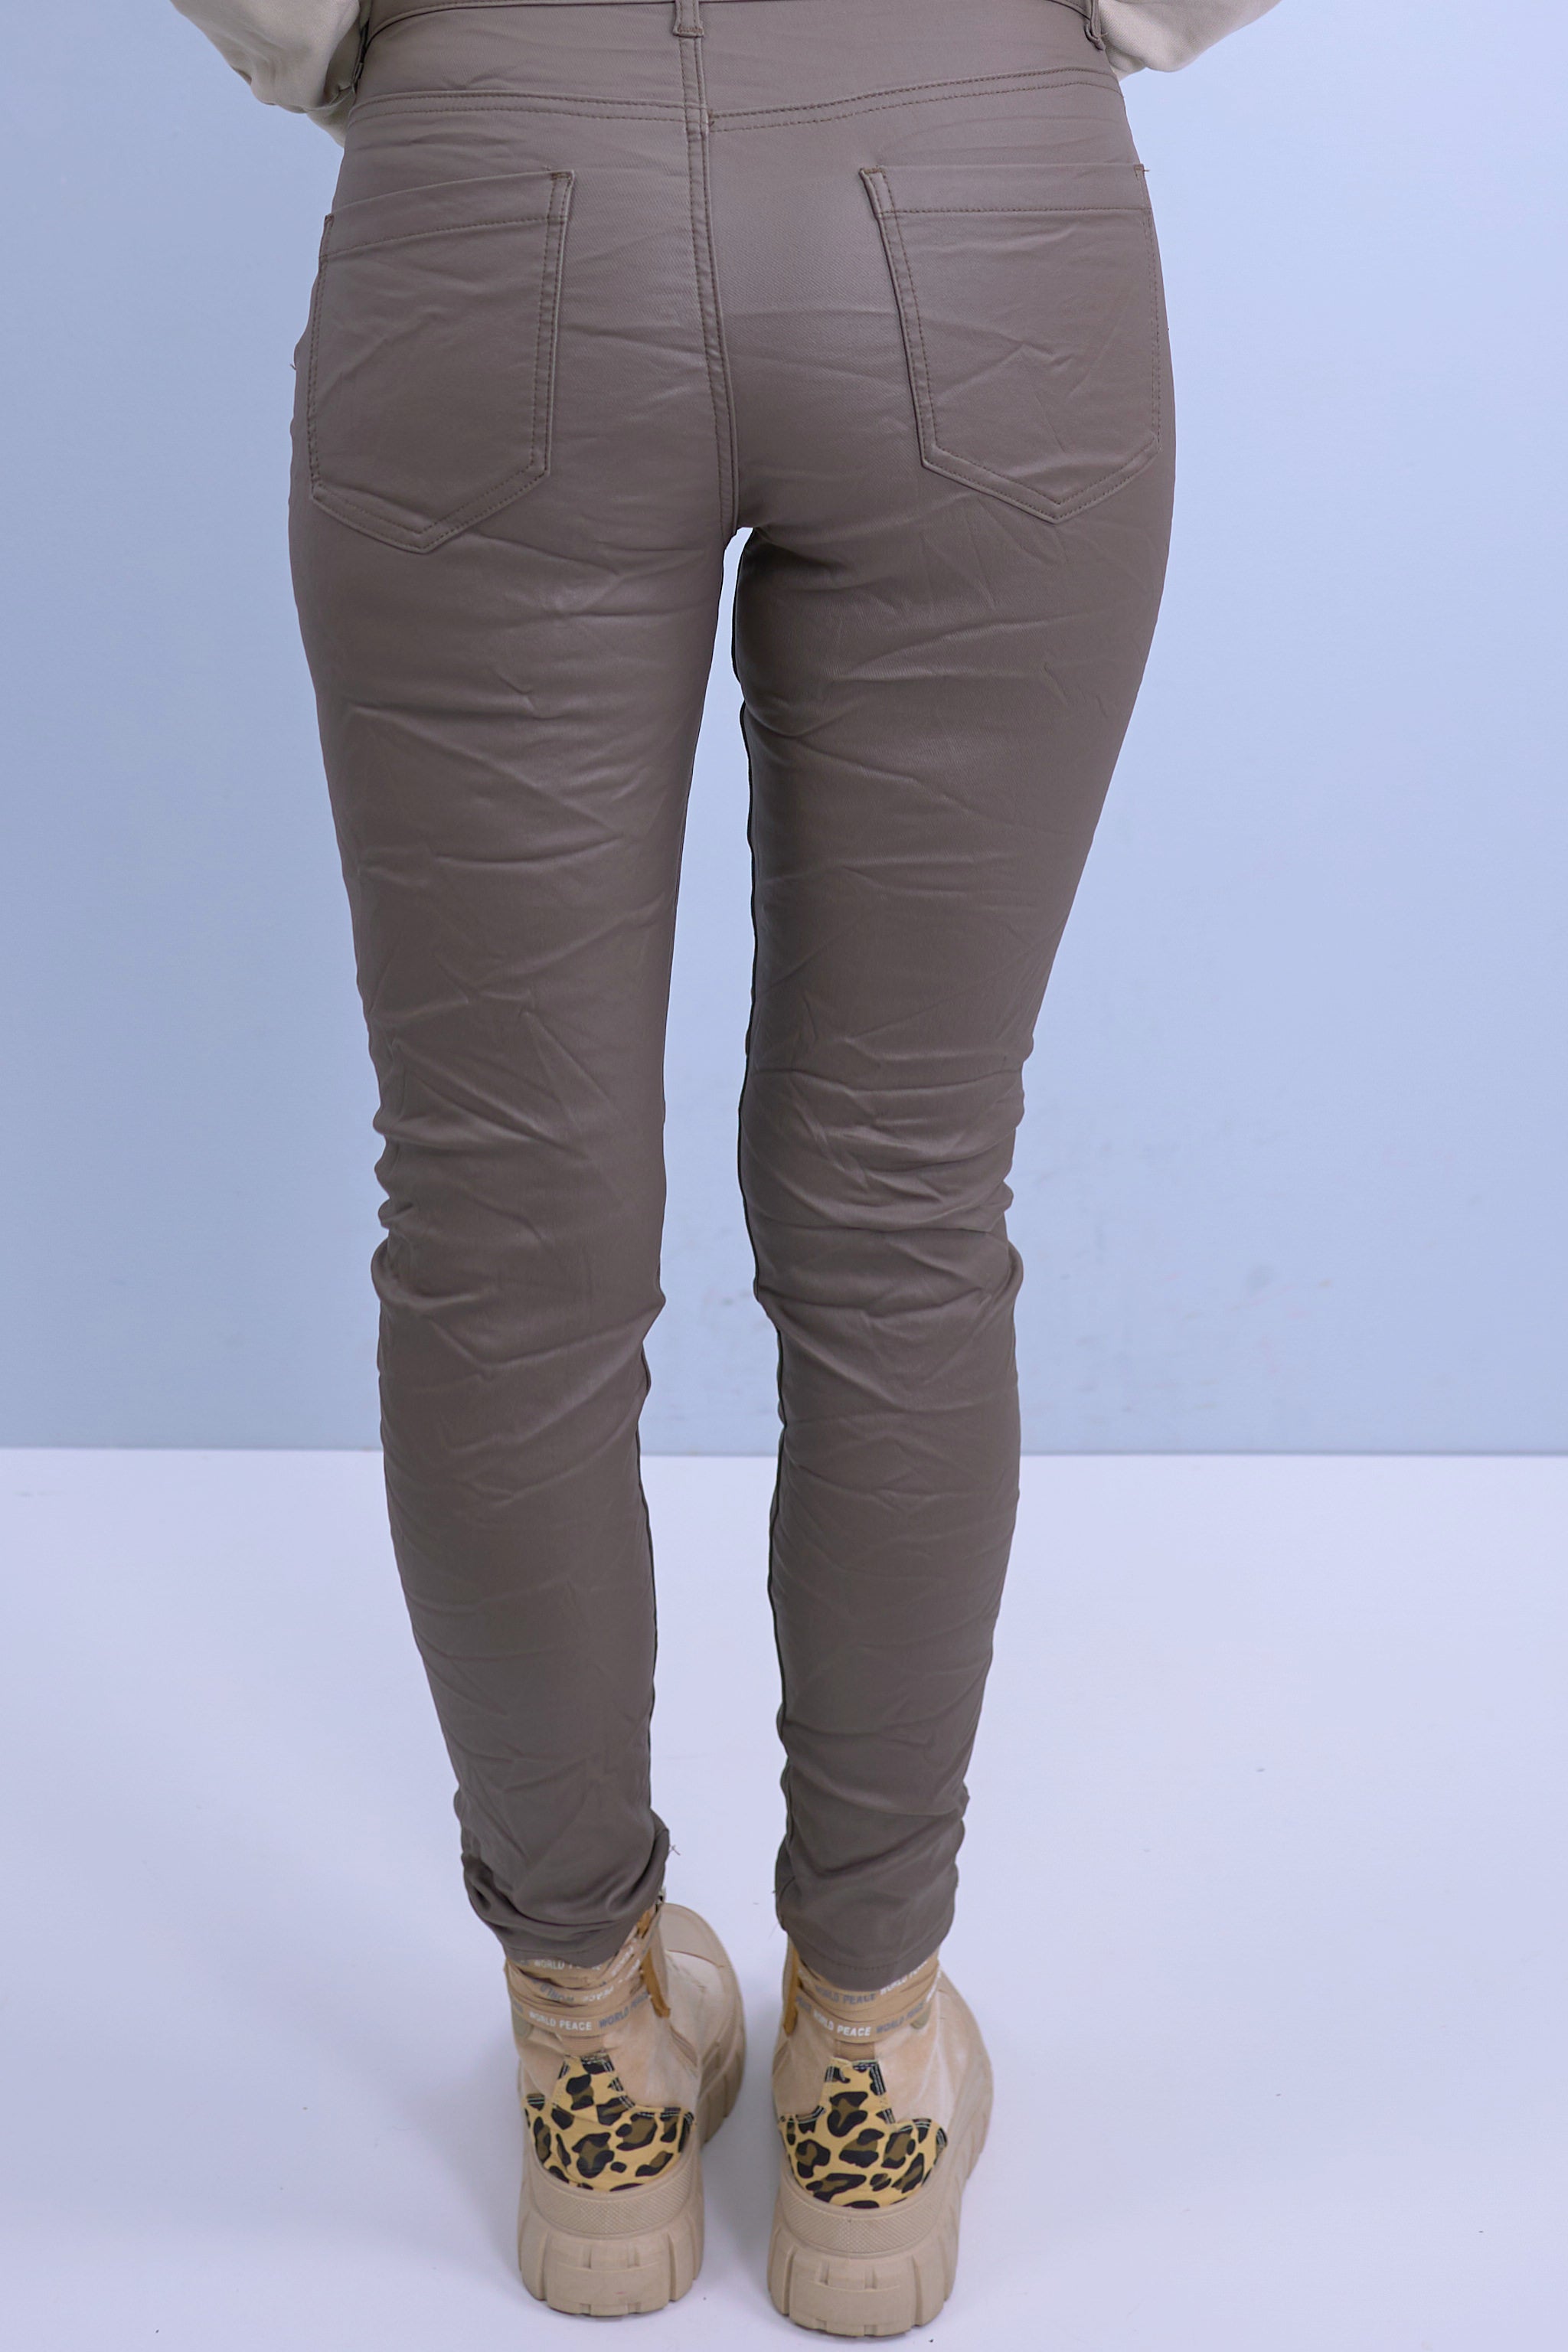 5-pocket style pants with coating, taupe